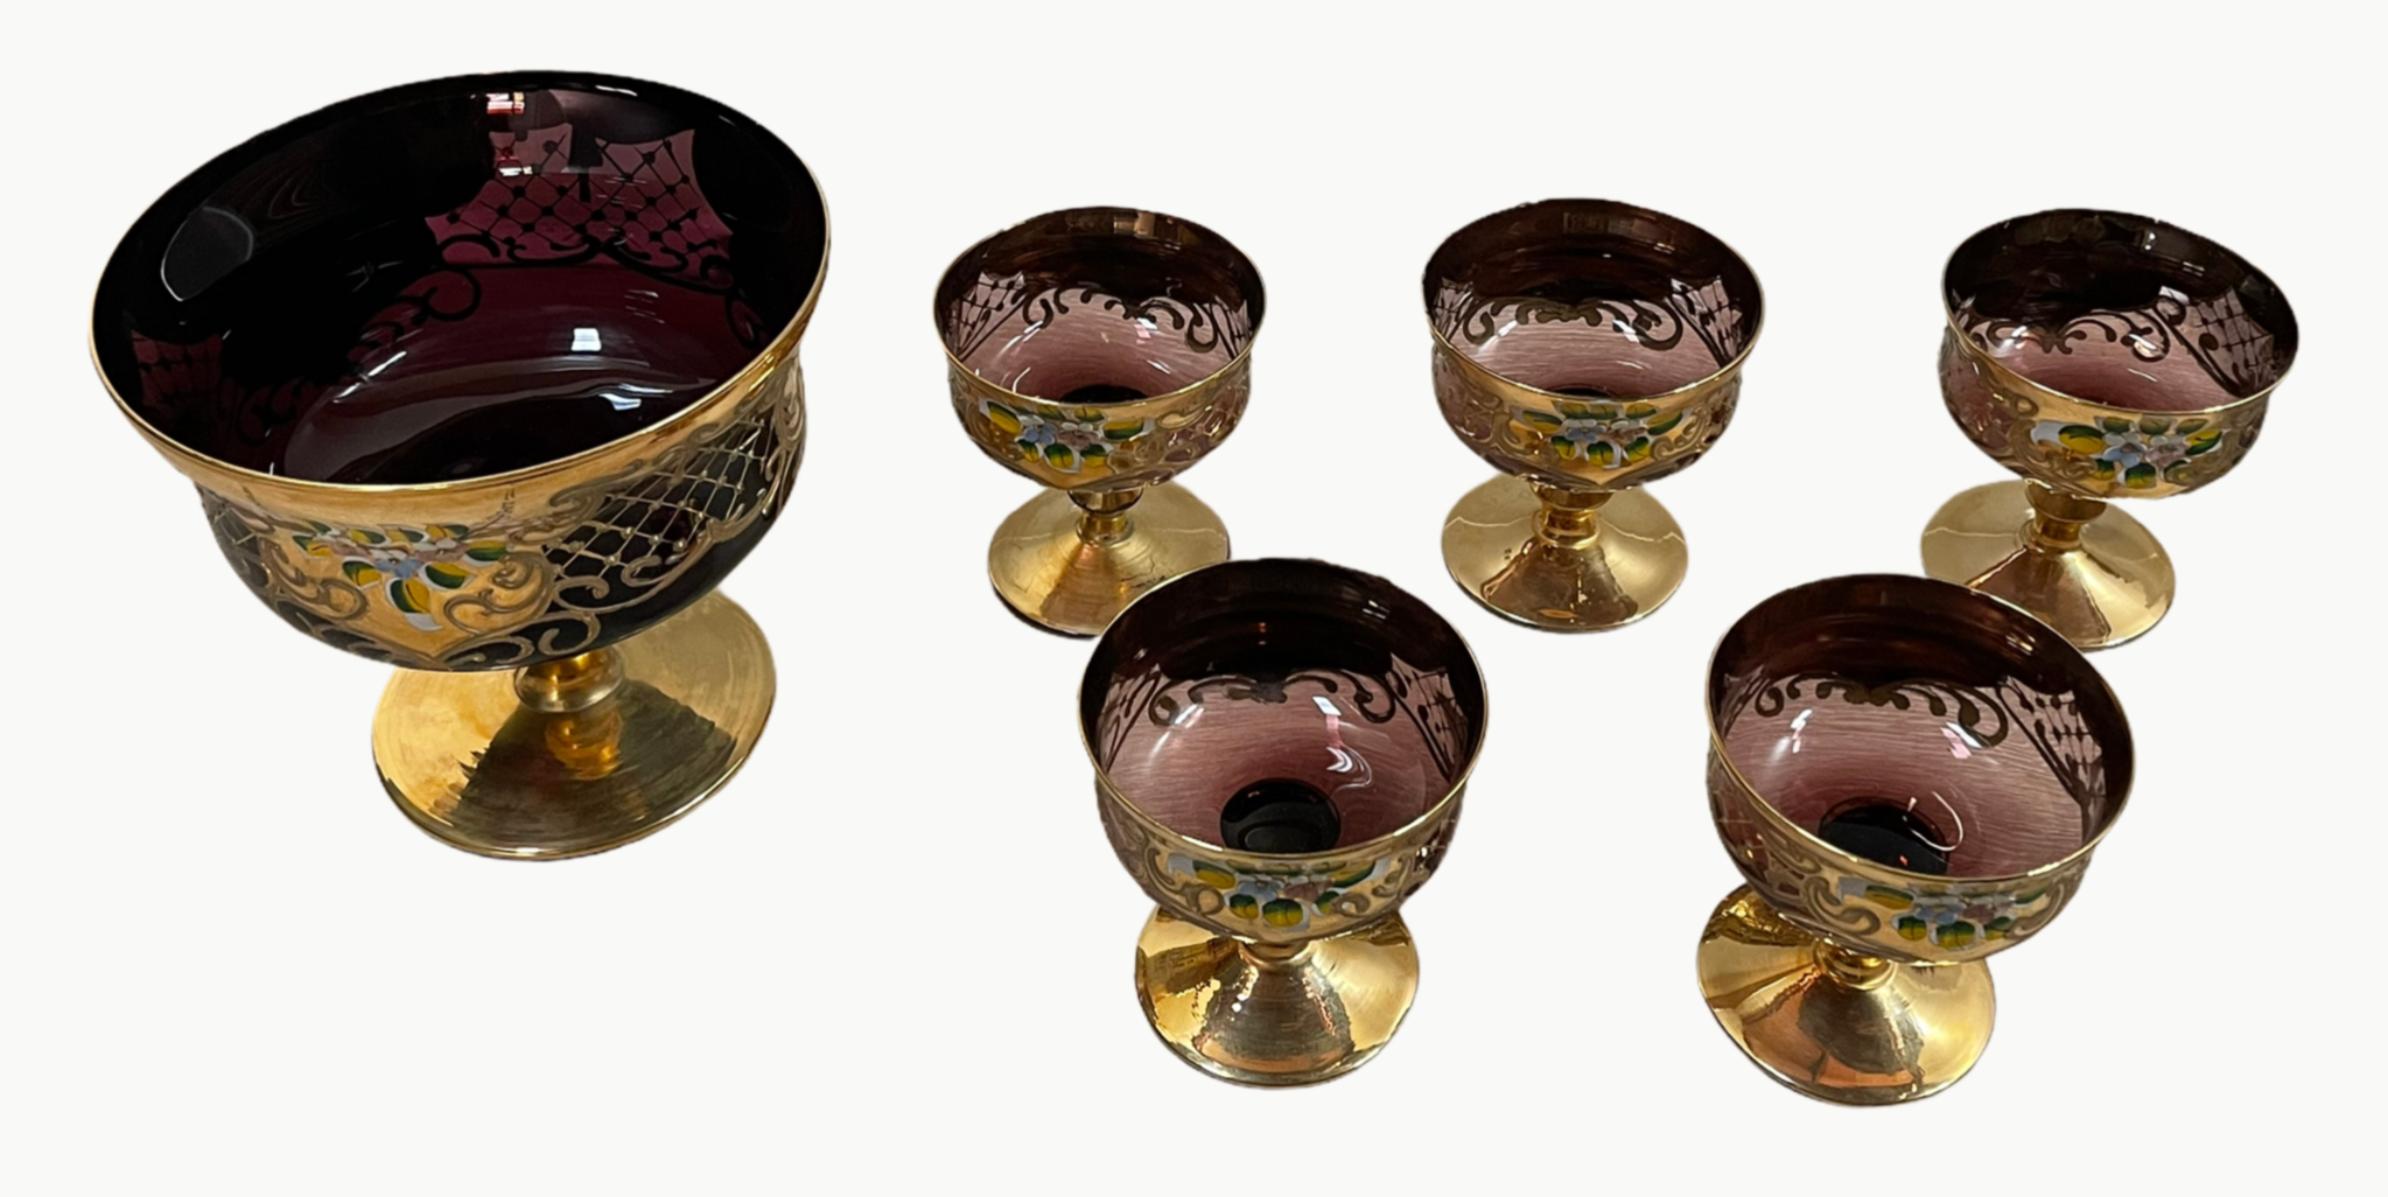 The murano glass dessert set is made in a rare technique called Tre Fuochi, which means “three flames” or “triple-firing” in Italian. This technique hails from the opulence of the eighteenth century Venice where many wealthy Venetians and foreigners